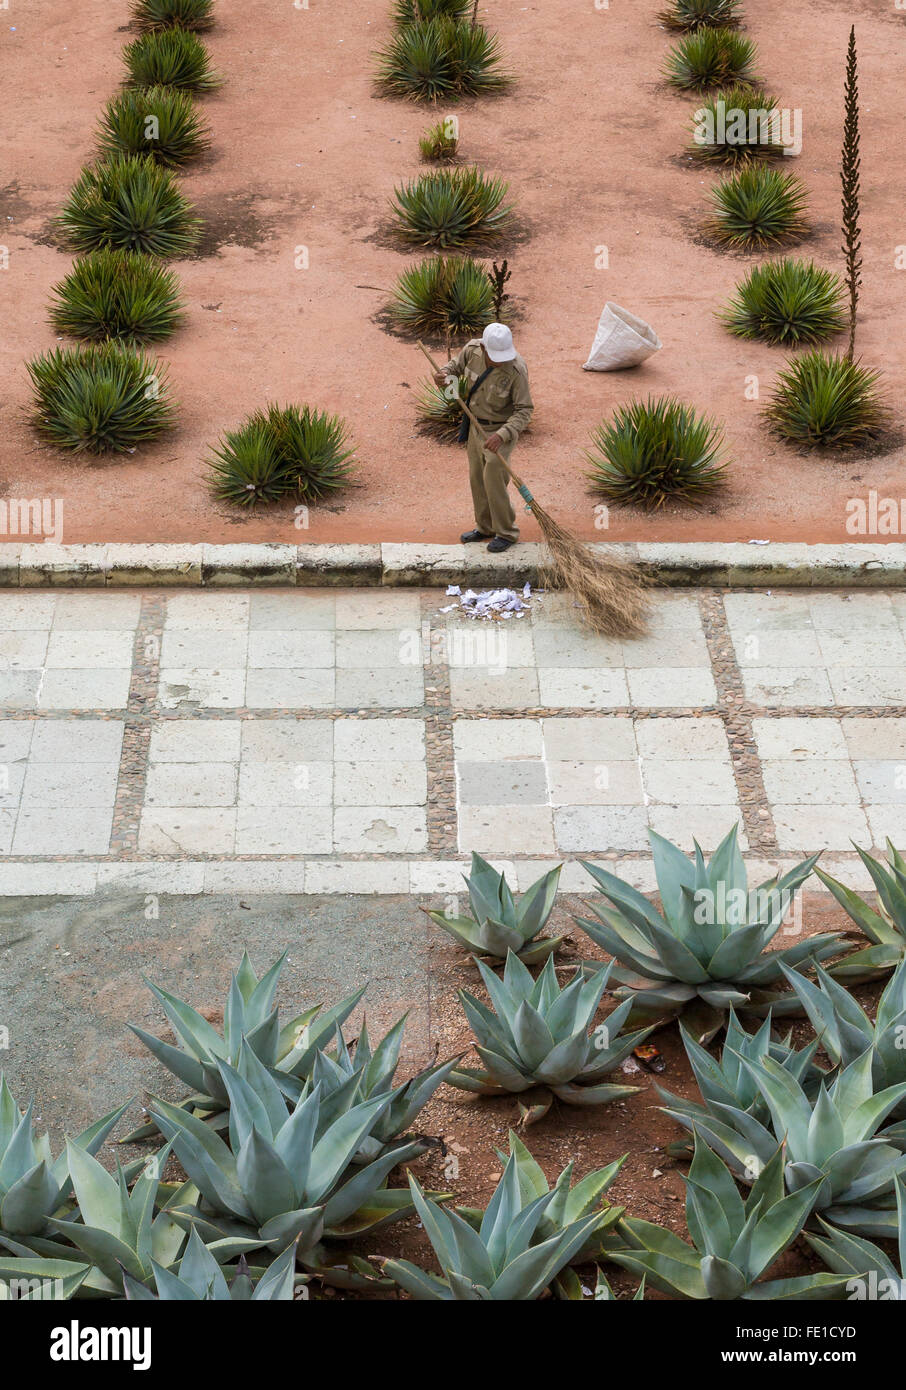 Man Mexican worker laborer sweeping church courtyard plaza with a rustic besom twig broom, Oaxaca City, Oaxaca, Mexico Stock Photo